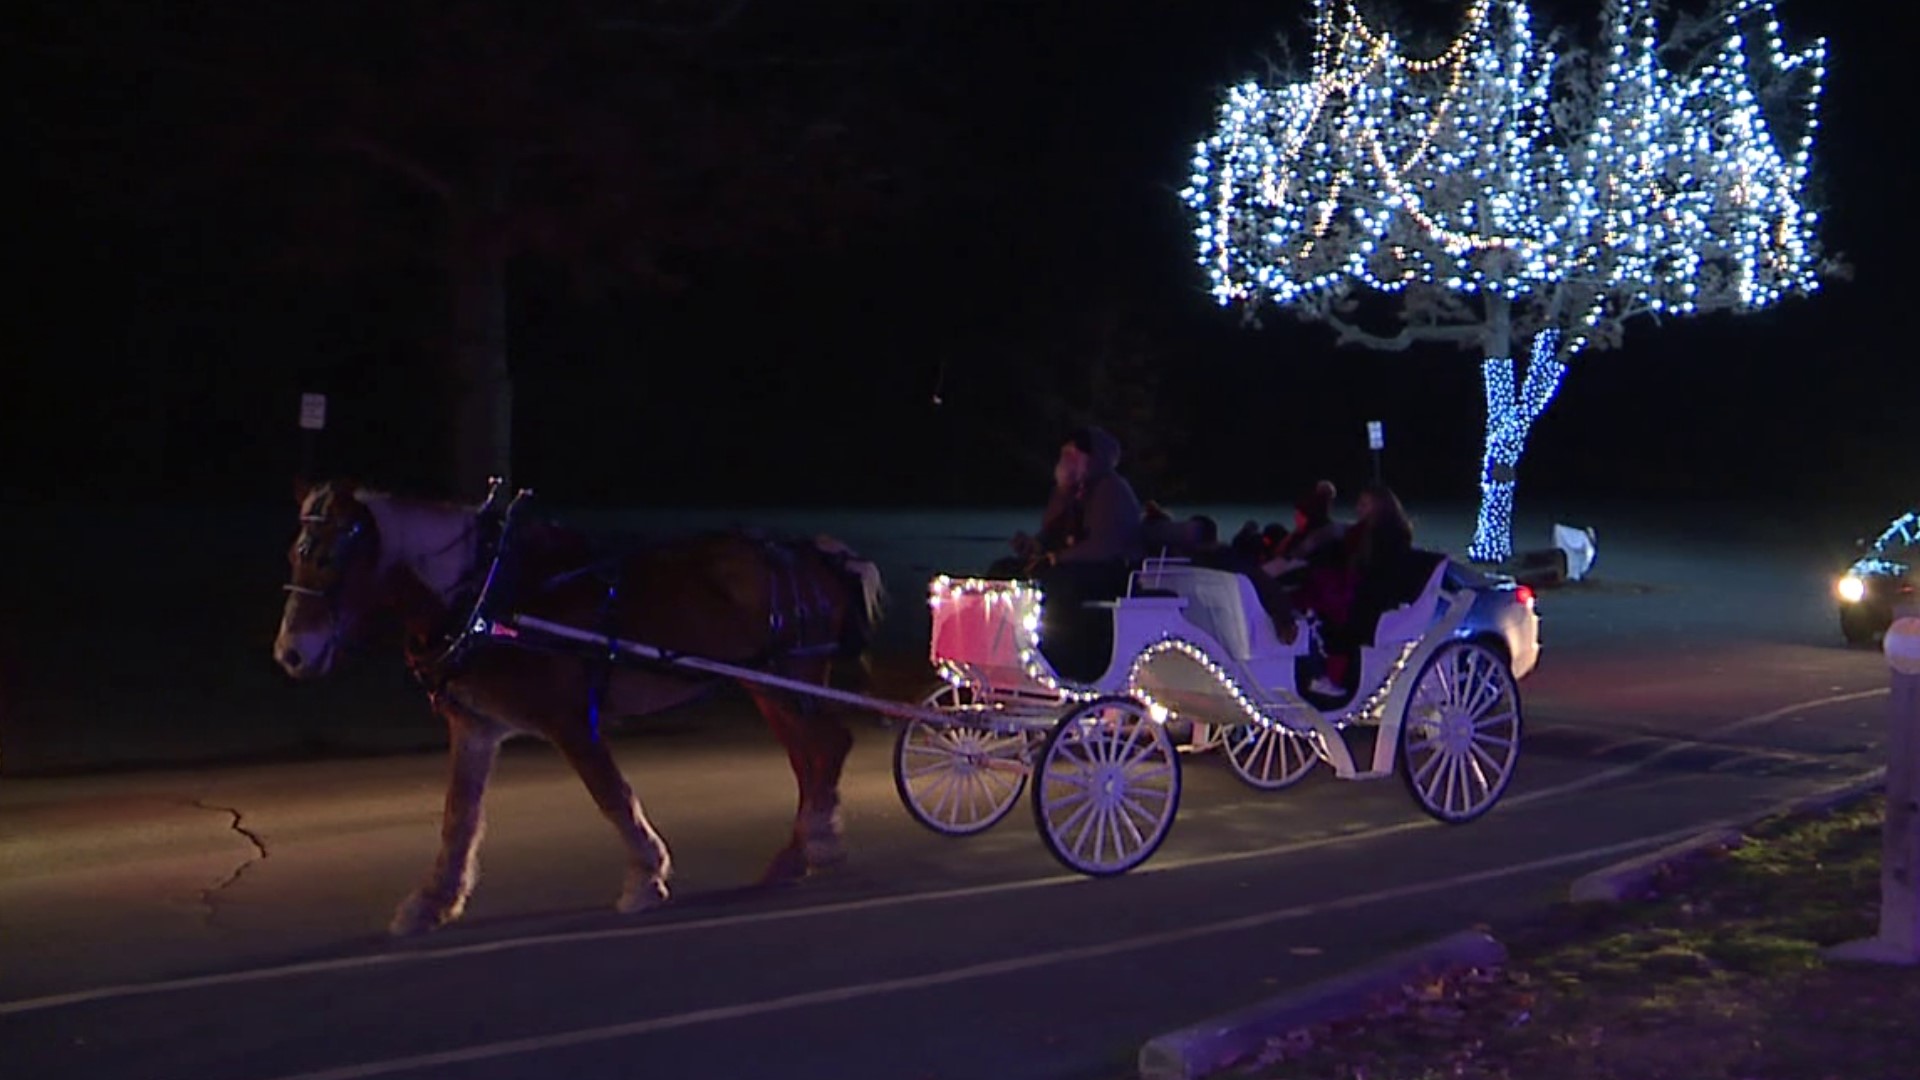 The carriage rides are available now through December 23 in Scranton.